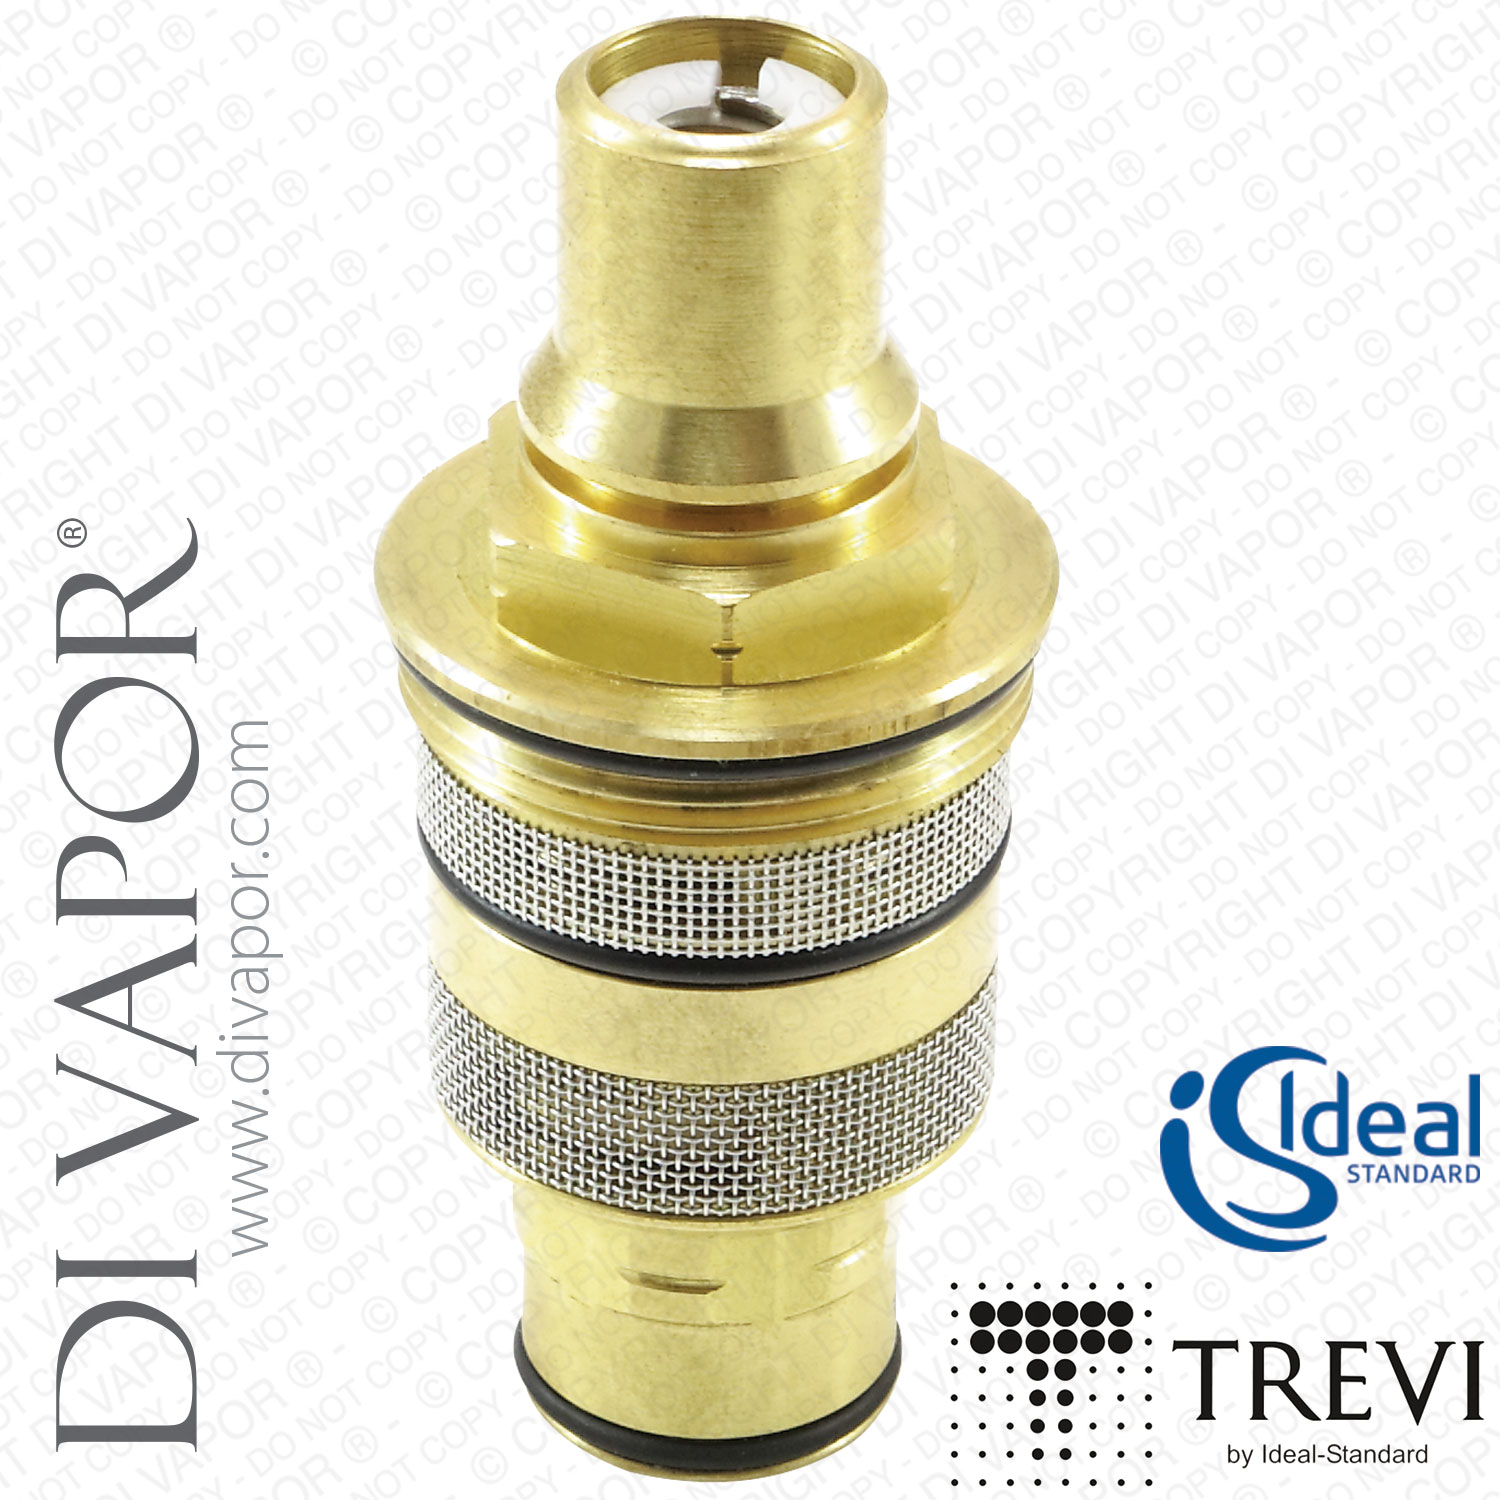 A962229NU Ideal Standard Genuine Trevi Ecotherm thermostatic cartridge 1/2 inch 